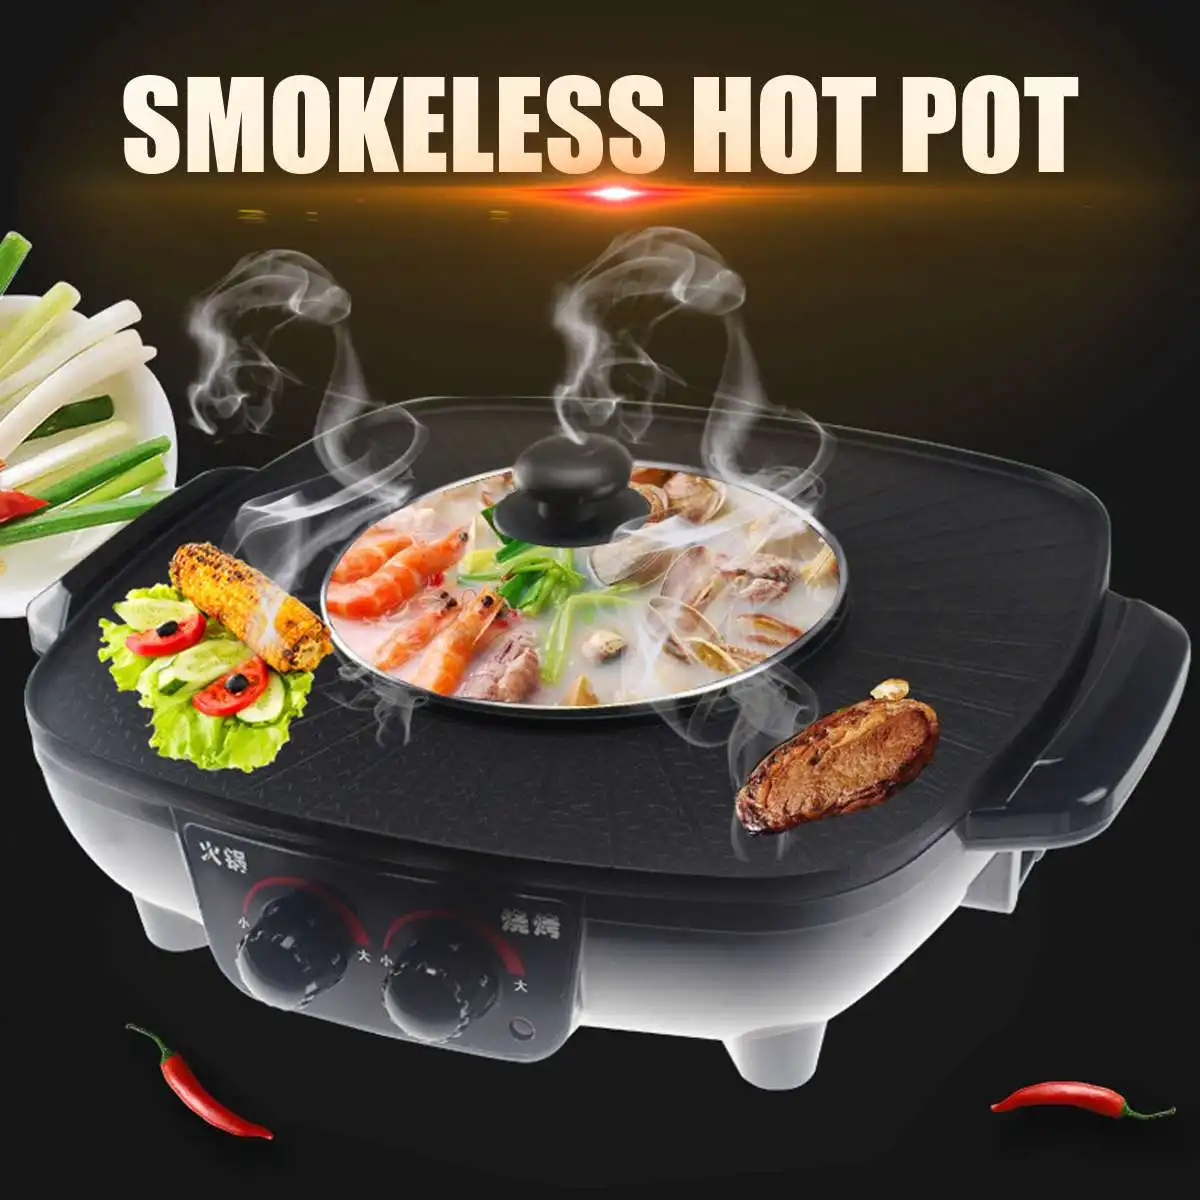 

220V 1600W Oven Hot Pot Electric Multi Cooker Durable Hotpot Non-Stick BBQ Roasting Baking Plate for Barbecue Kitchen Cookware